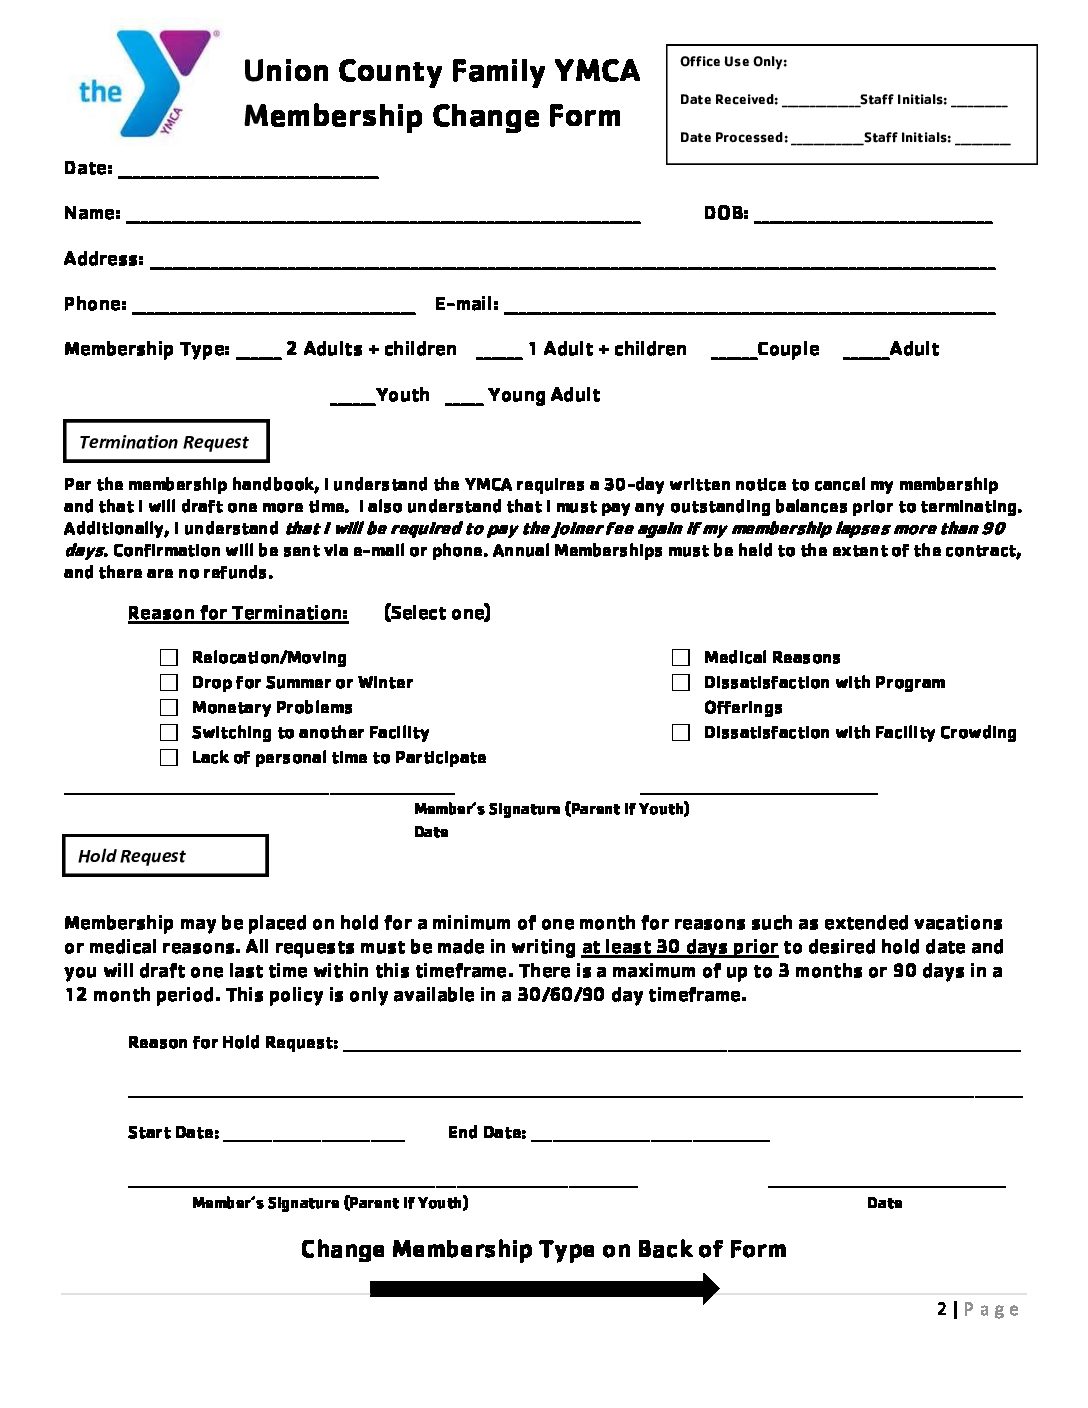 Membership Termination And Change Form 2020 Union County Family Ymca